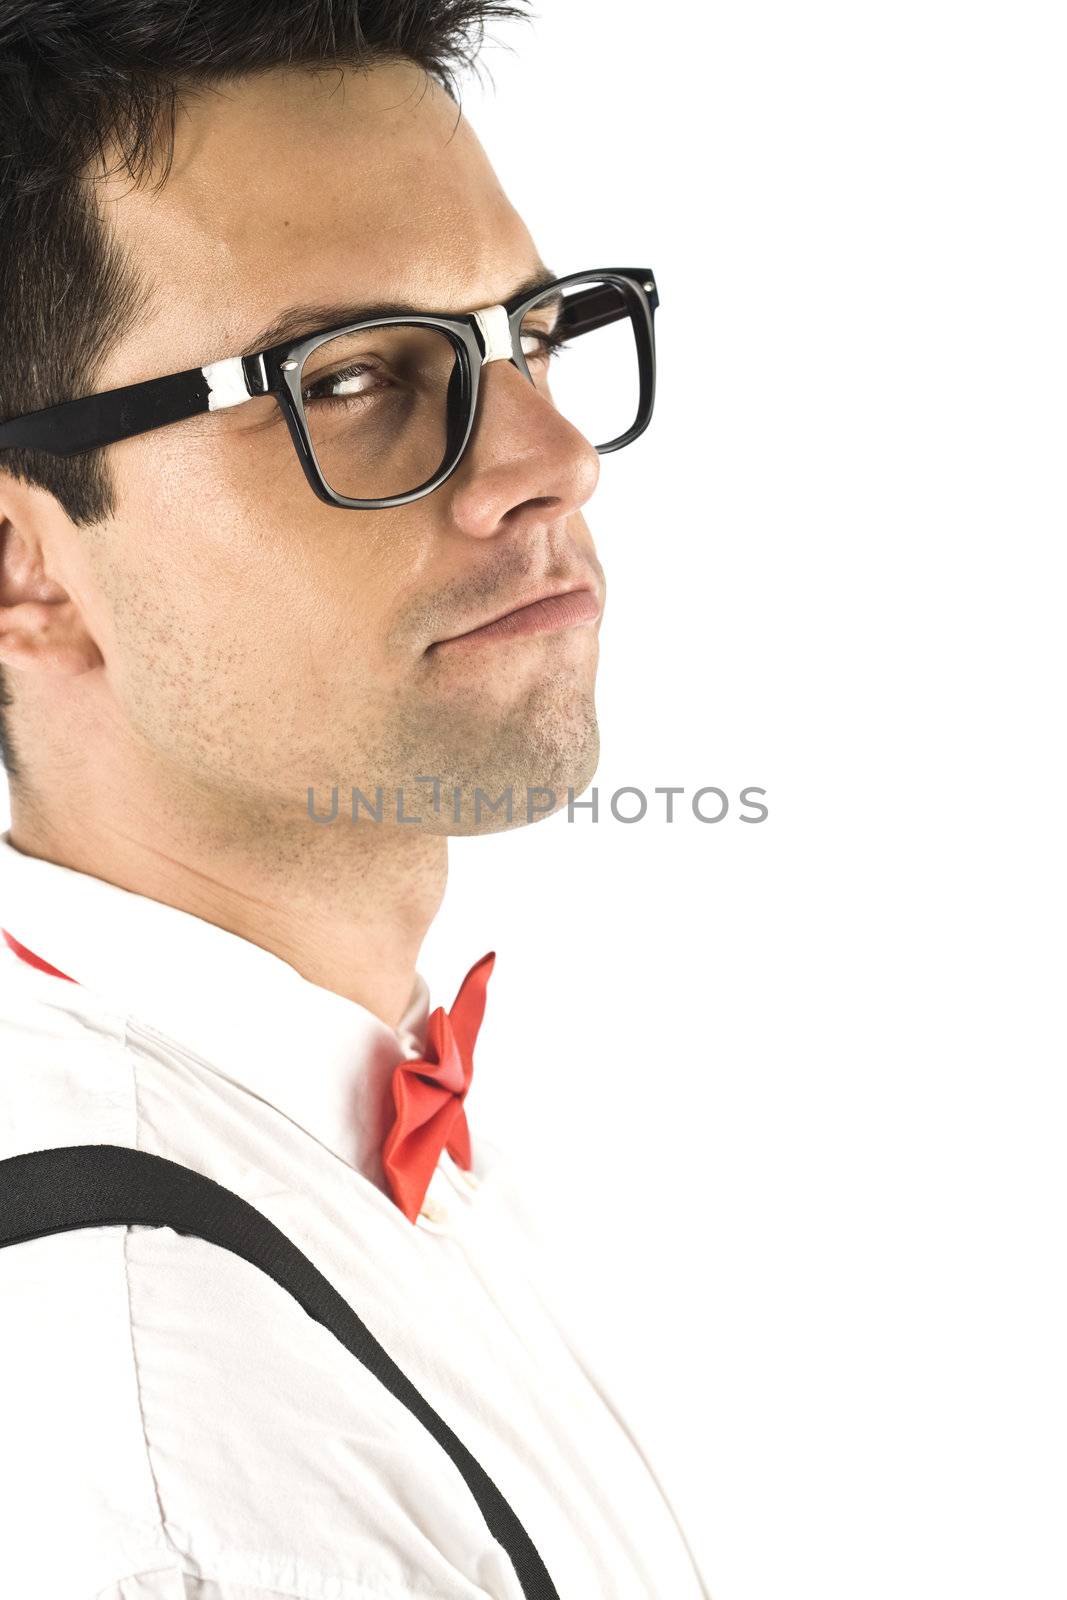 A young, caucasian nerd, close-up, isolated on a white background.